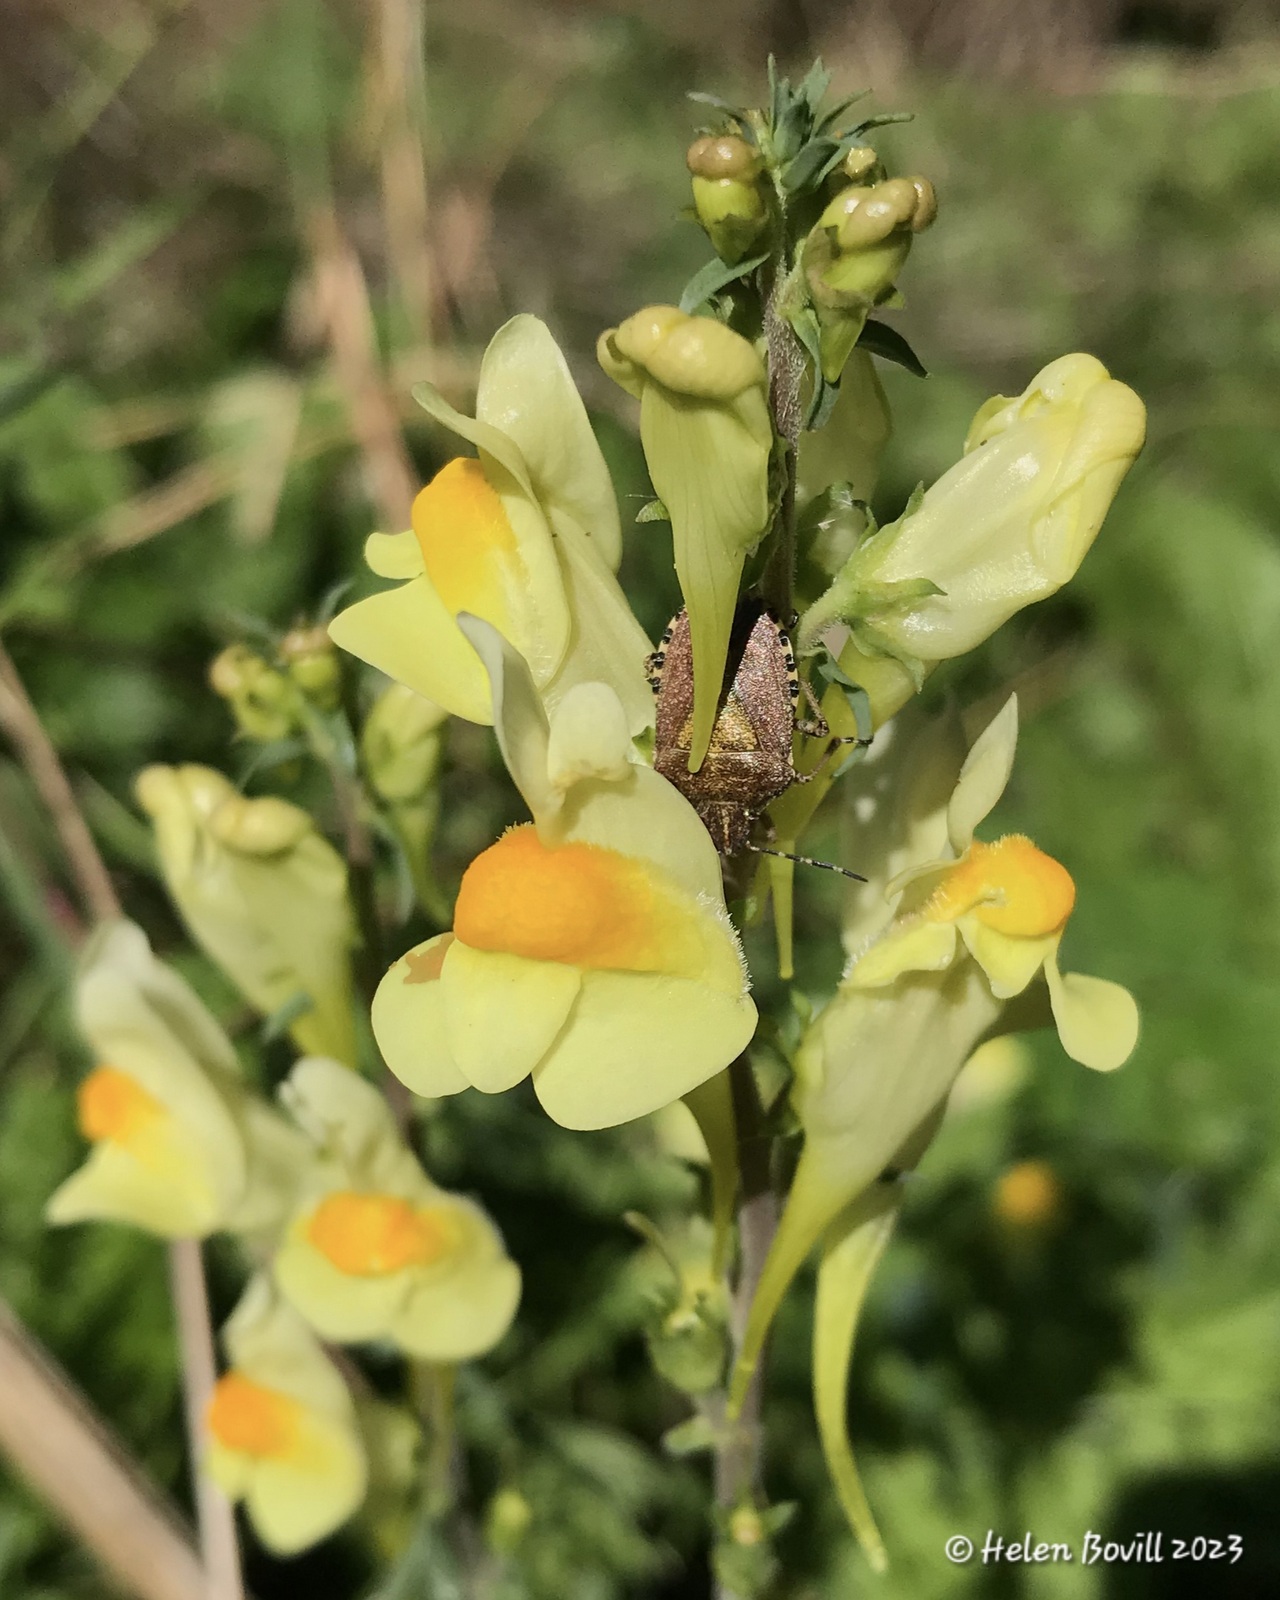 Toadflax with a Hairy Shield Bug on the flowerhead